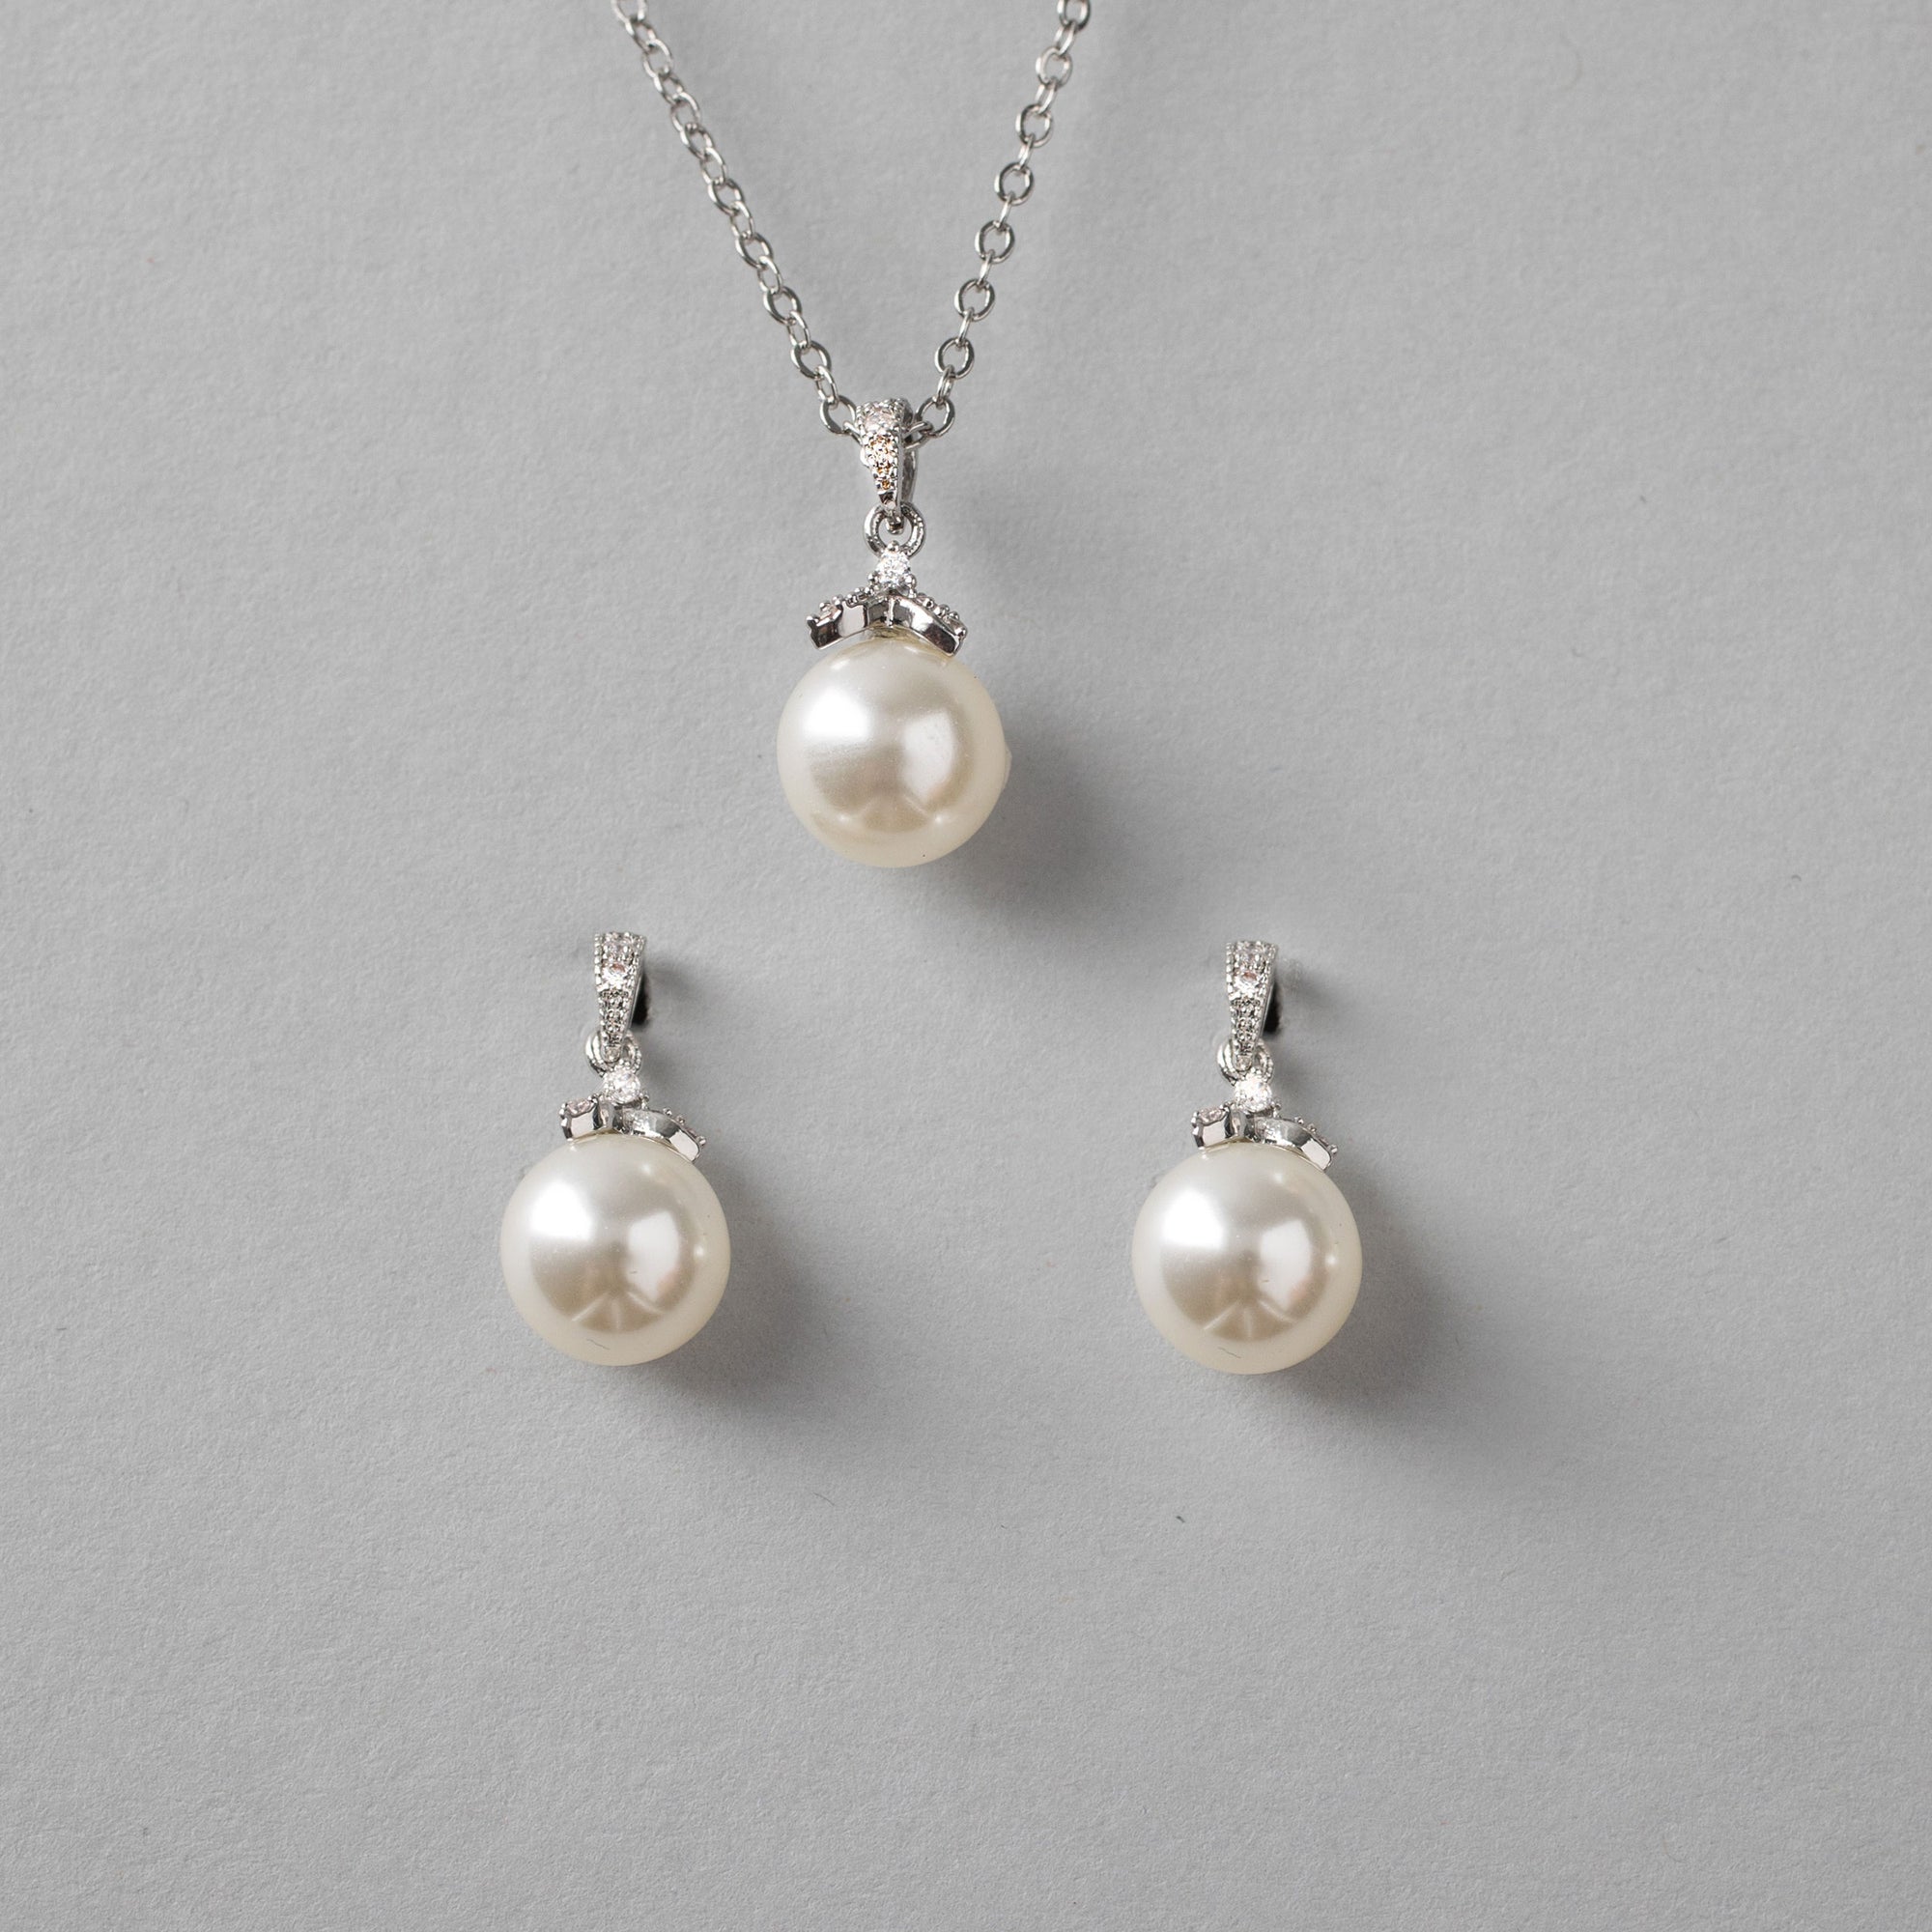 Pearl Pendant Necklace and Earrings Set